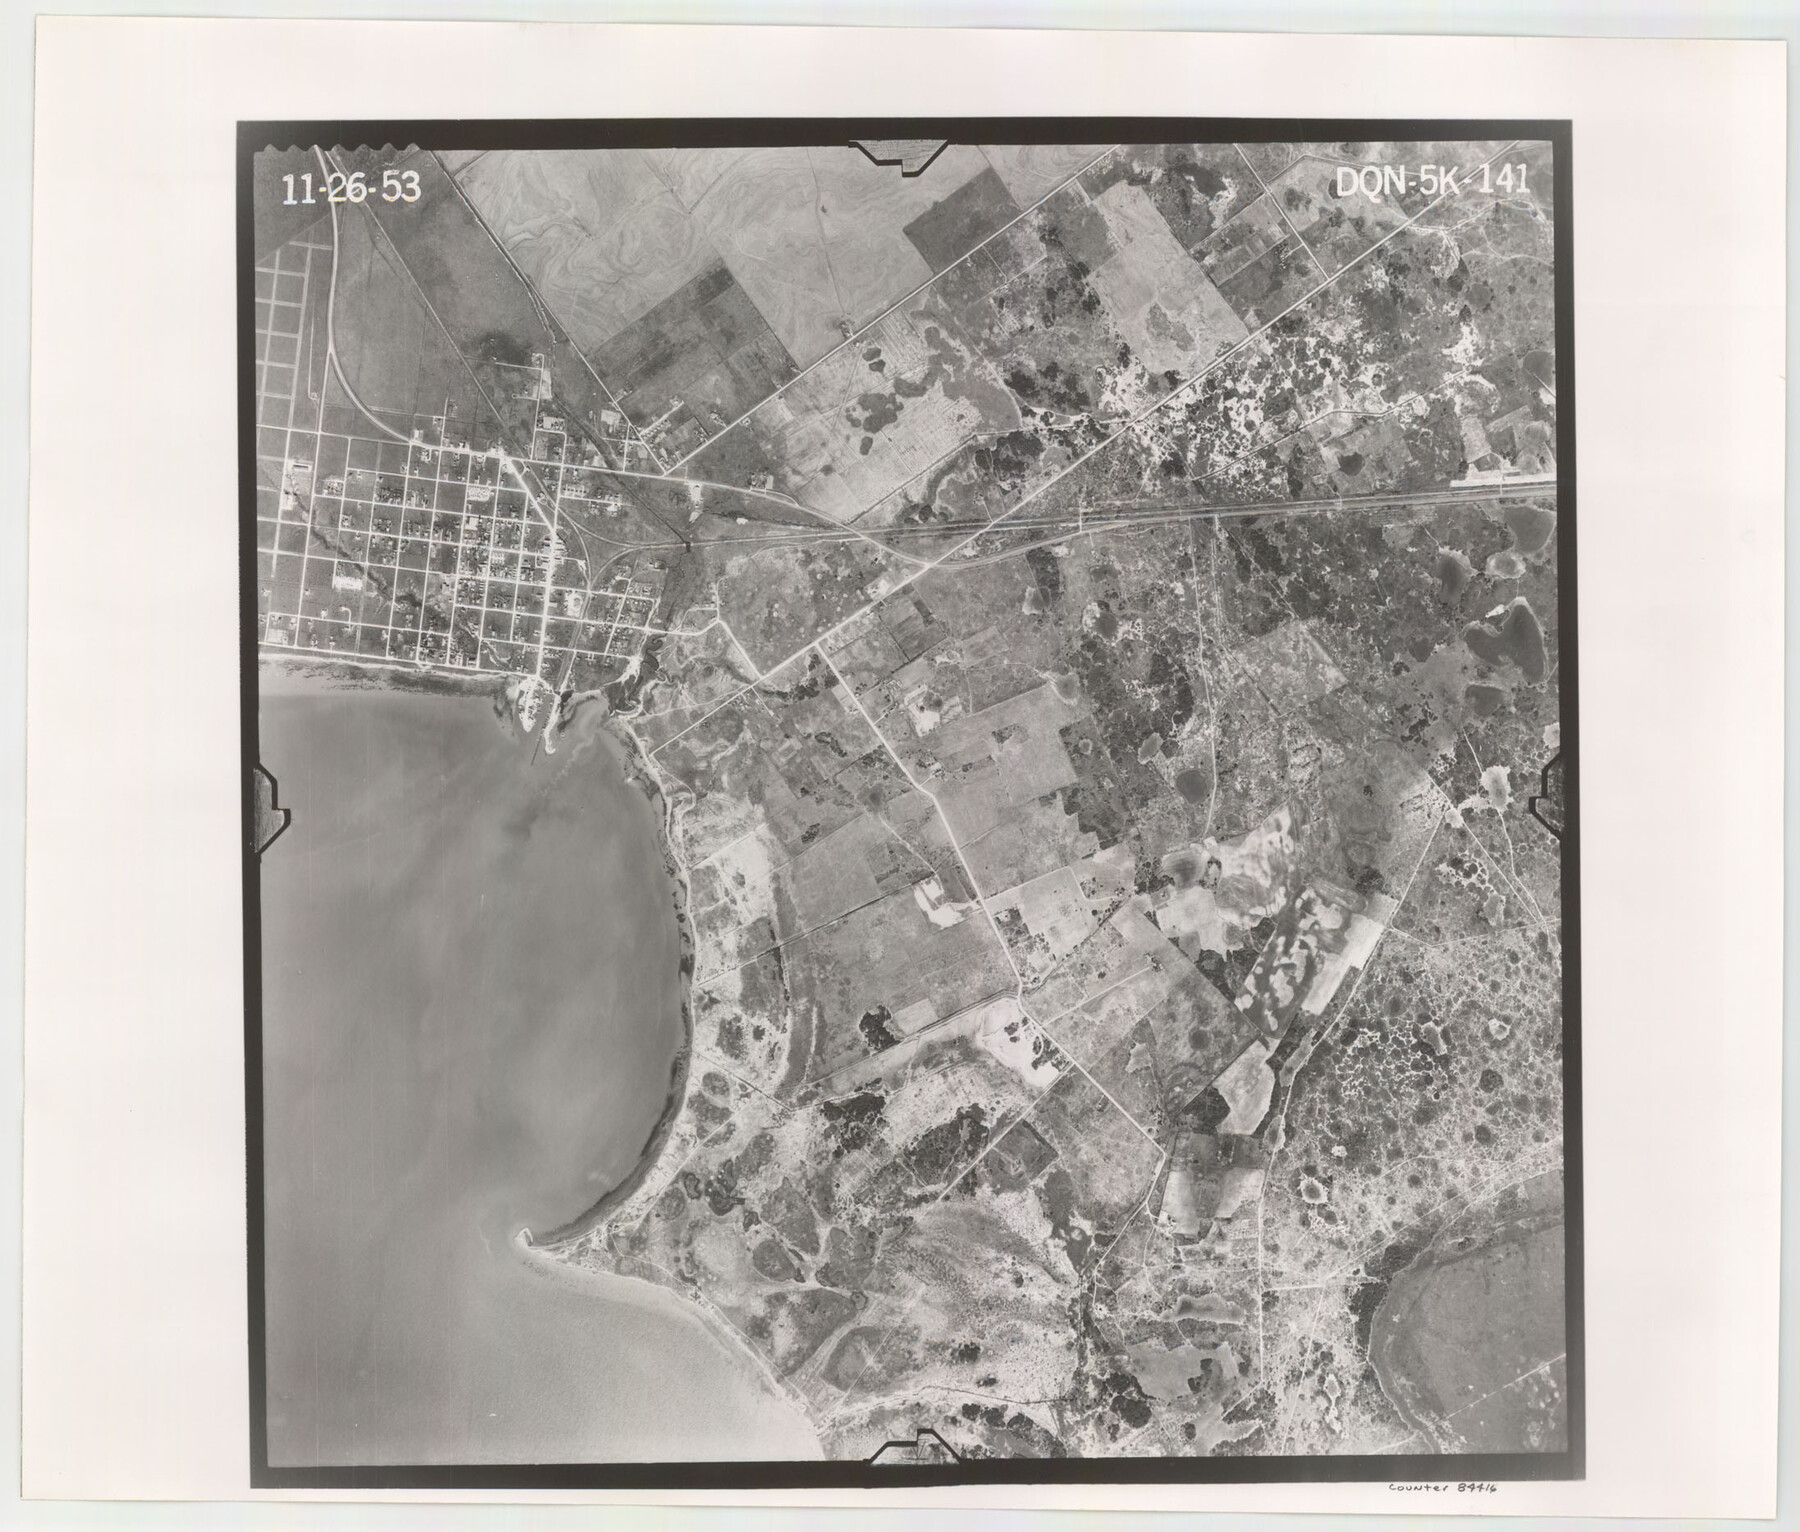 84416, Flight Mission No. DQN-5K, Frame 141, Calhoun County, General Map Collection